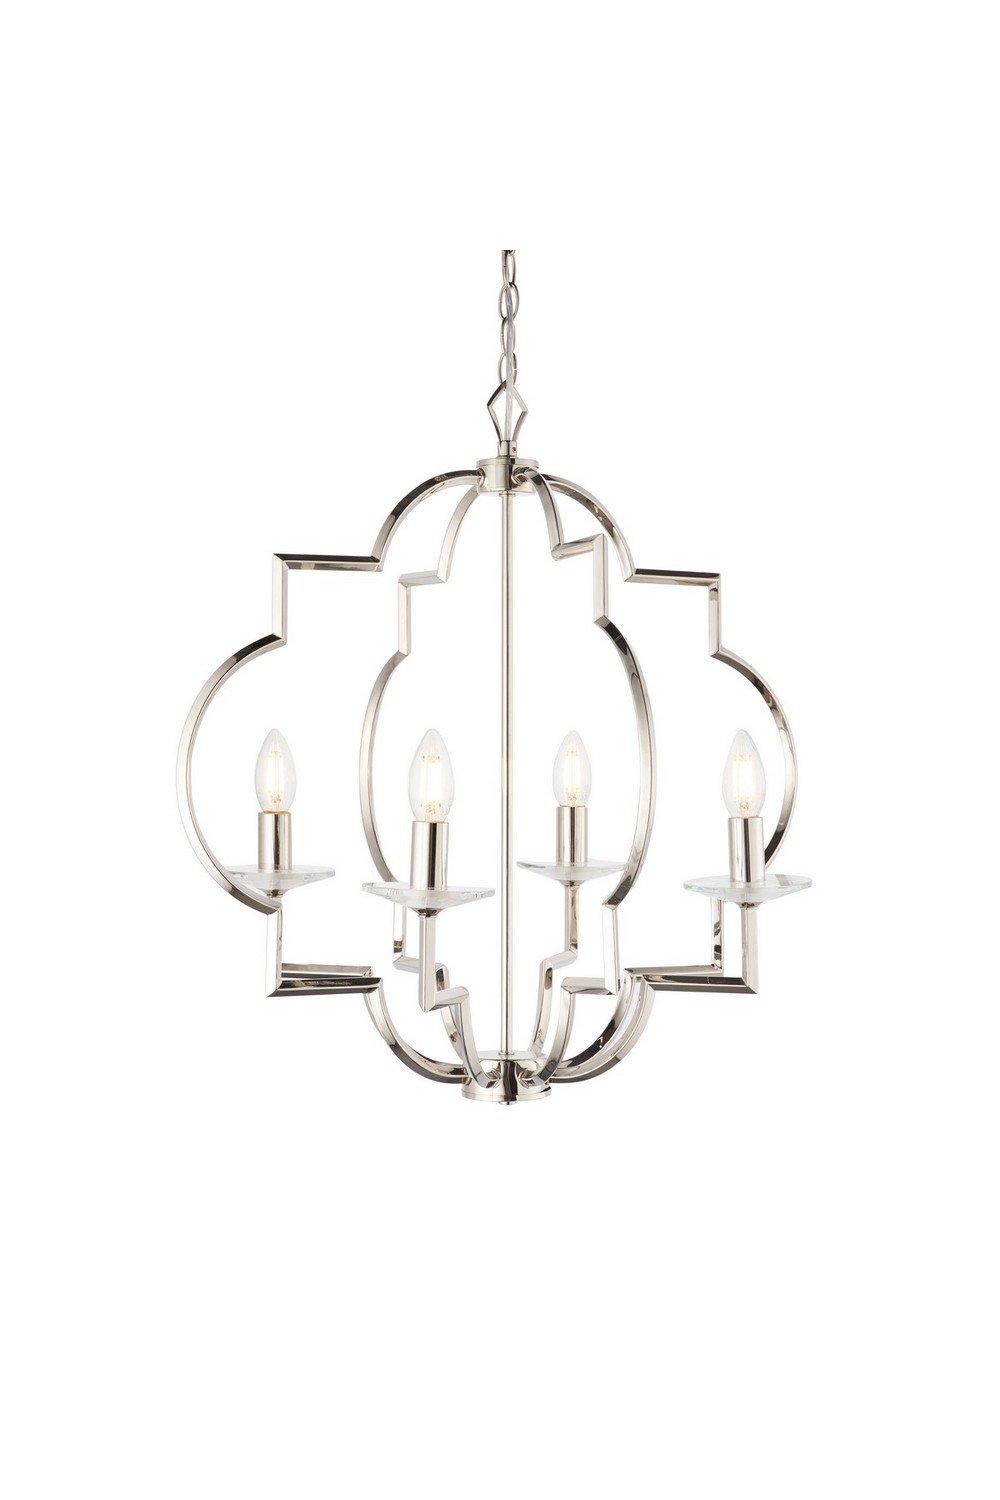 Garland 4 Light Ceiling Pendant Polished Nickel & Clear Crystal Glass E14